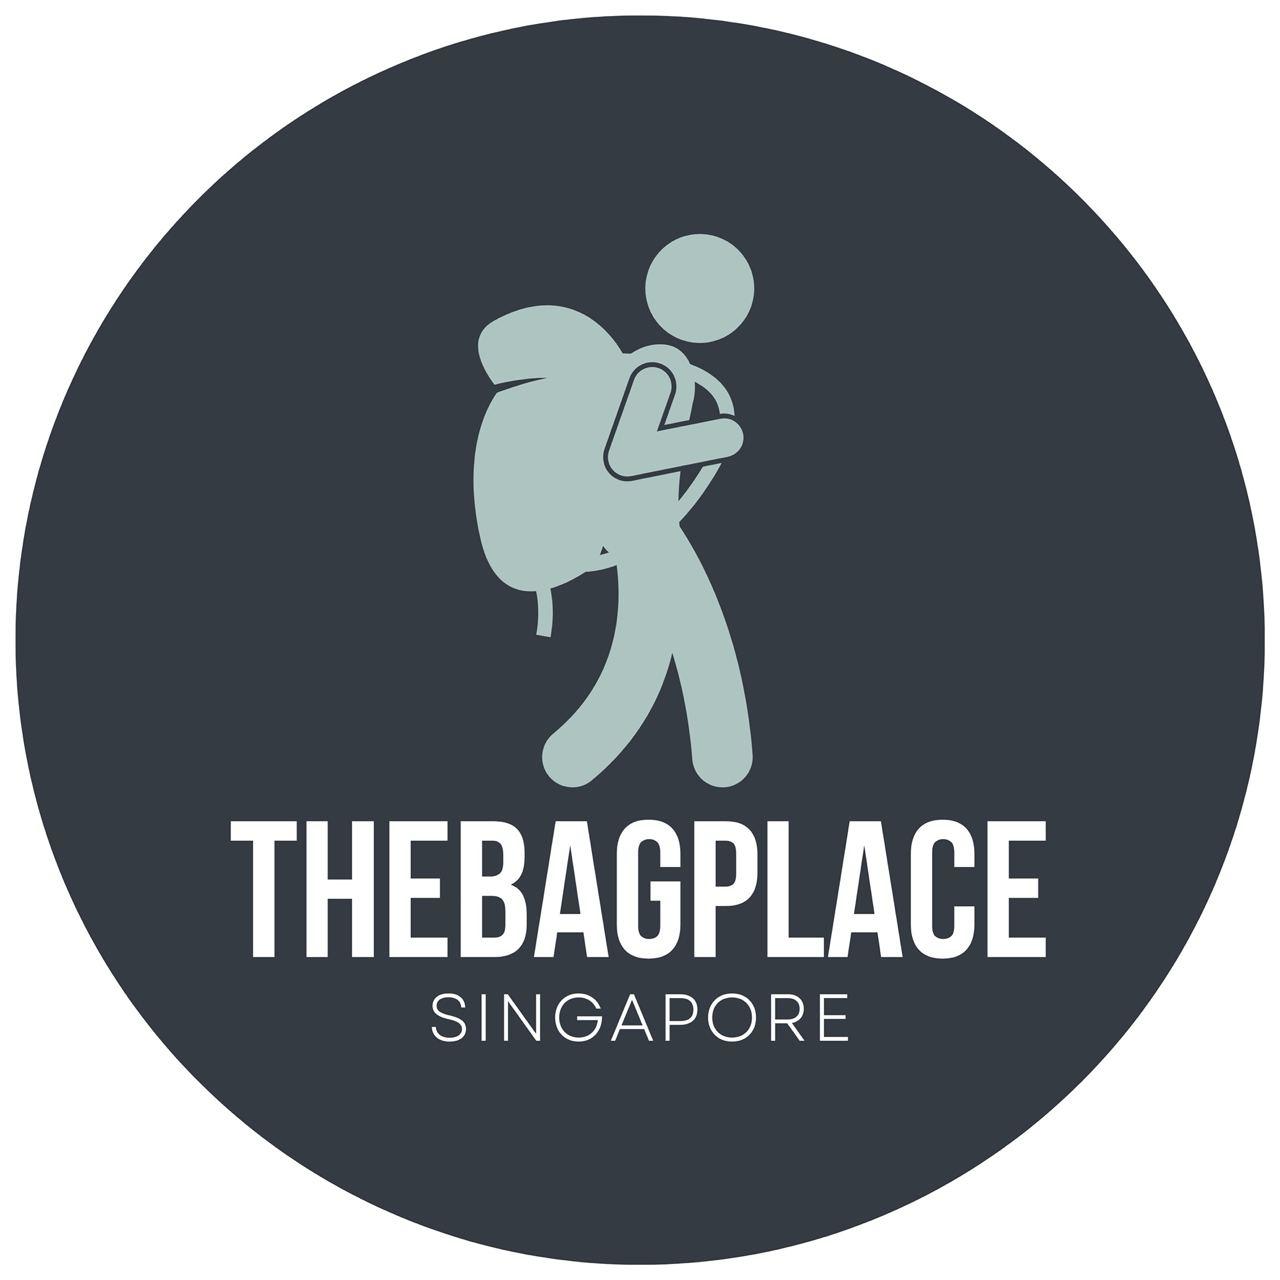 TheBagPlaceSG's images